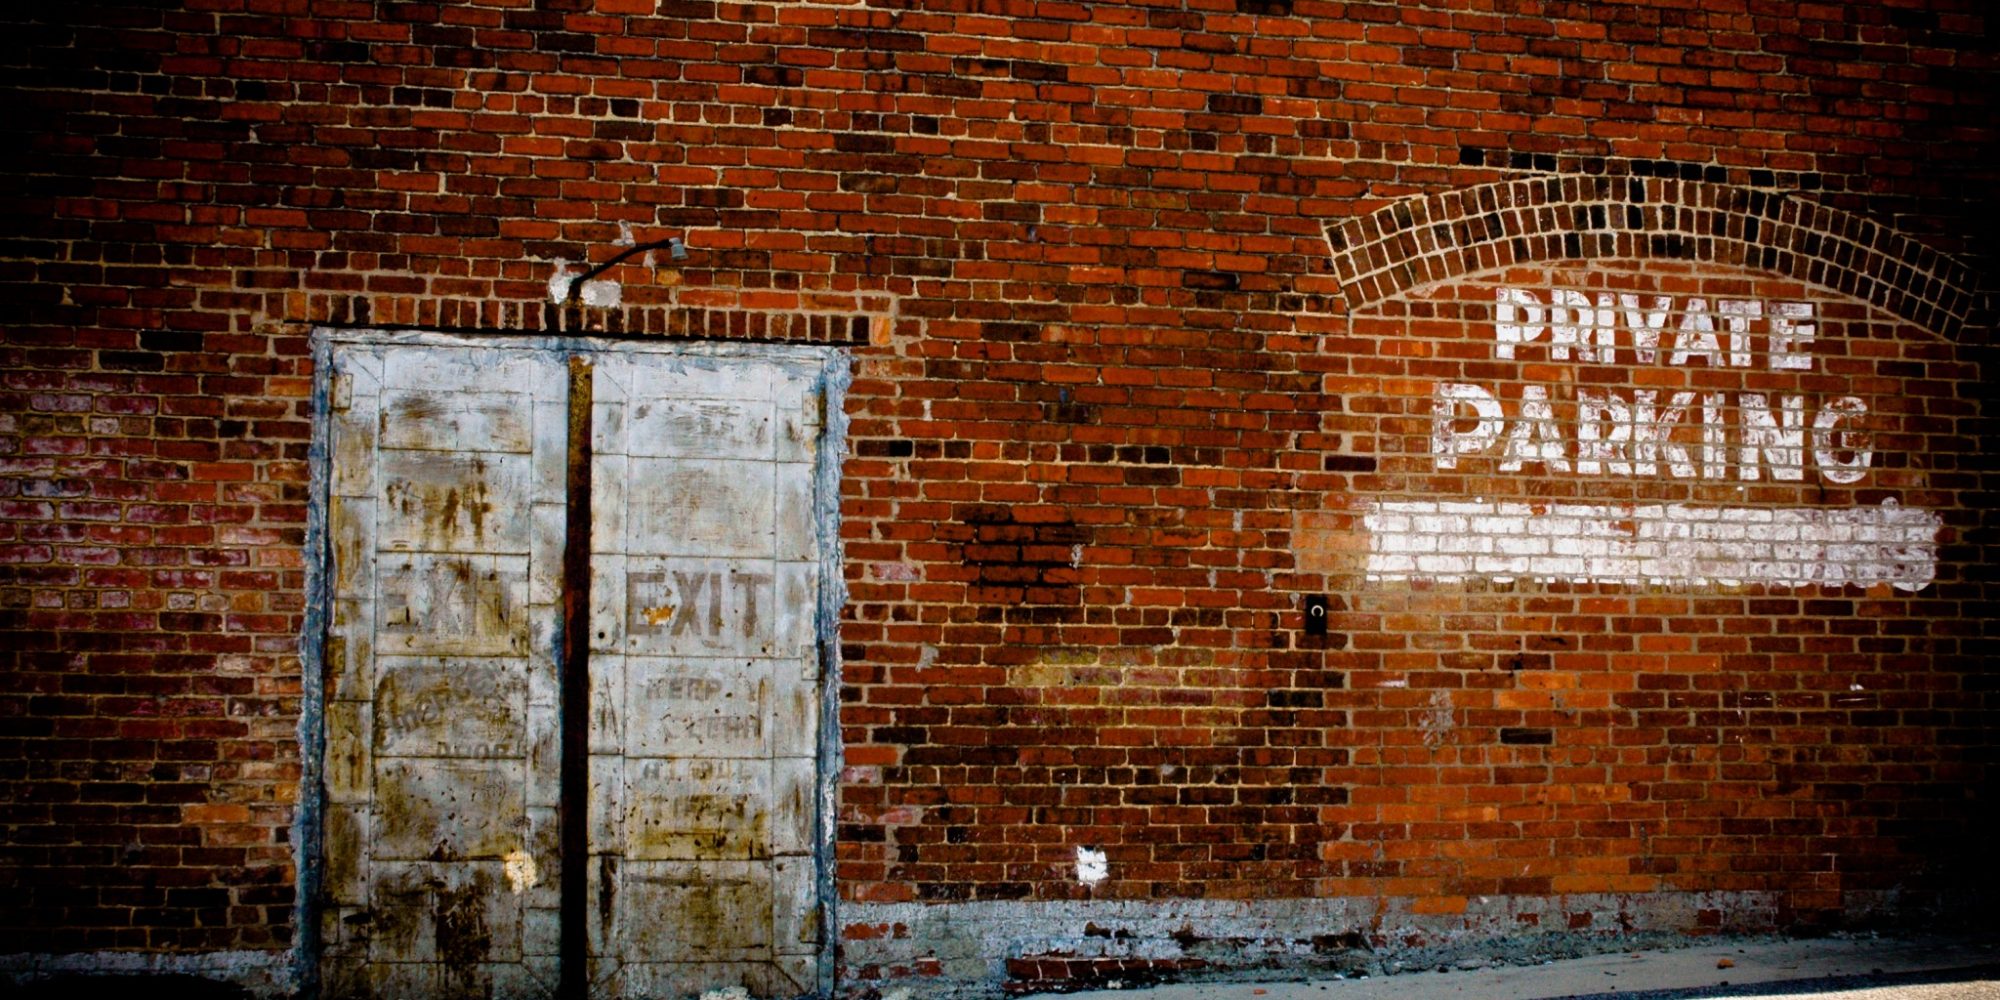 public-domain-images-free-stock-photos-brick-wall-rustic-old-metal-doors-private-parking